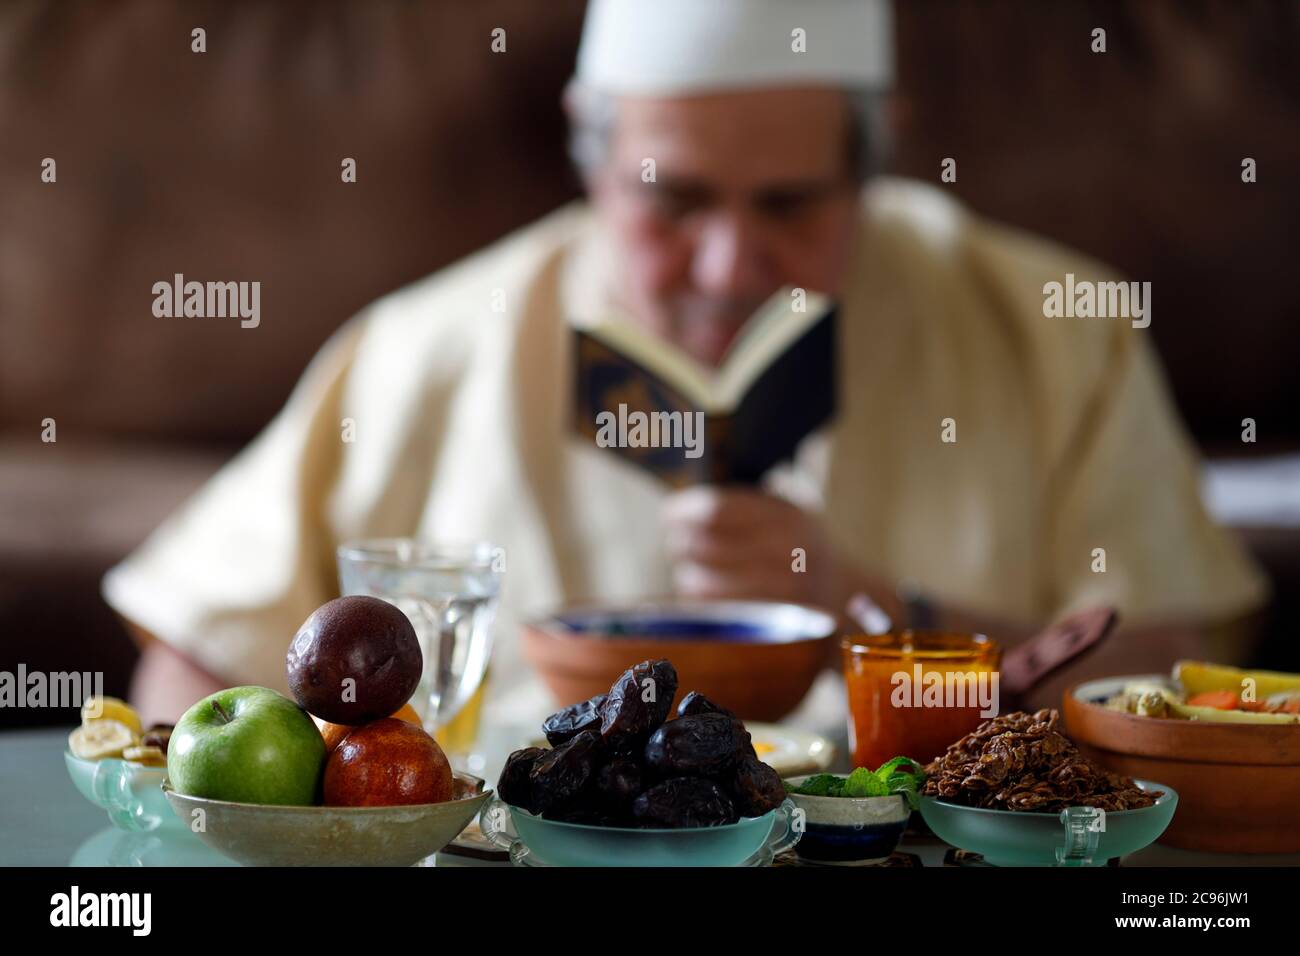 Traditional meal for iftar in time of Ramadan after the fast has been broken.  Muslim reading Quran.  France. Stock Photo